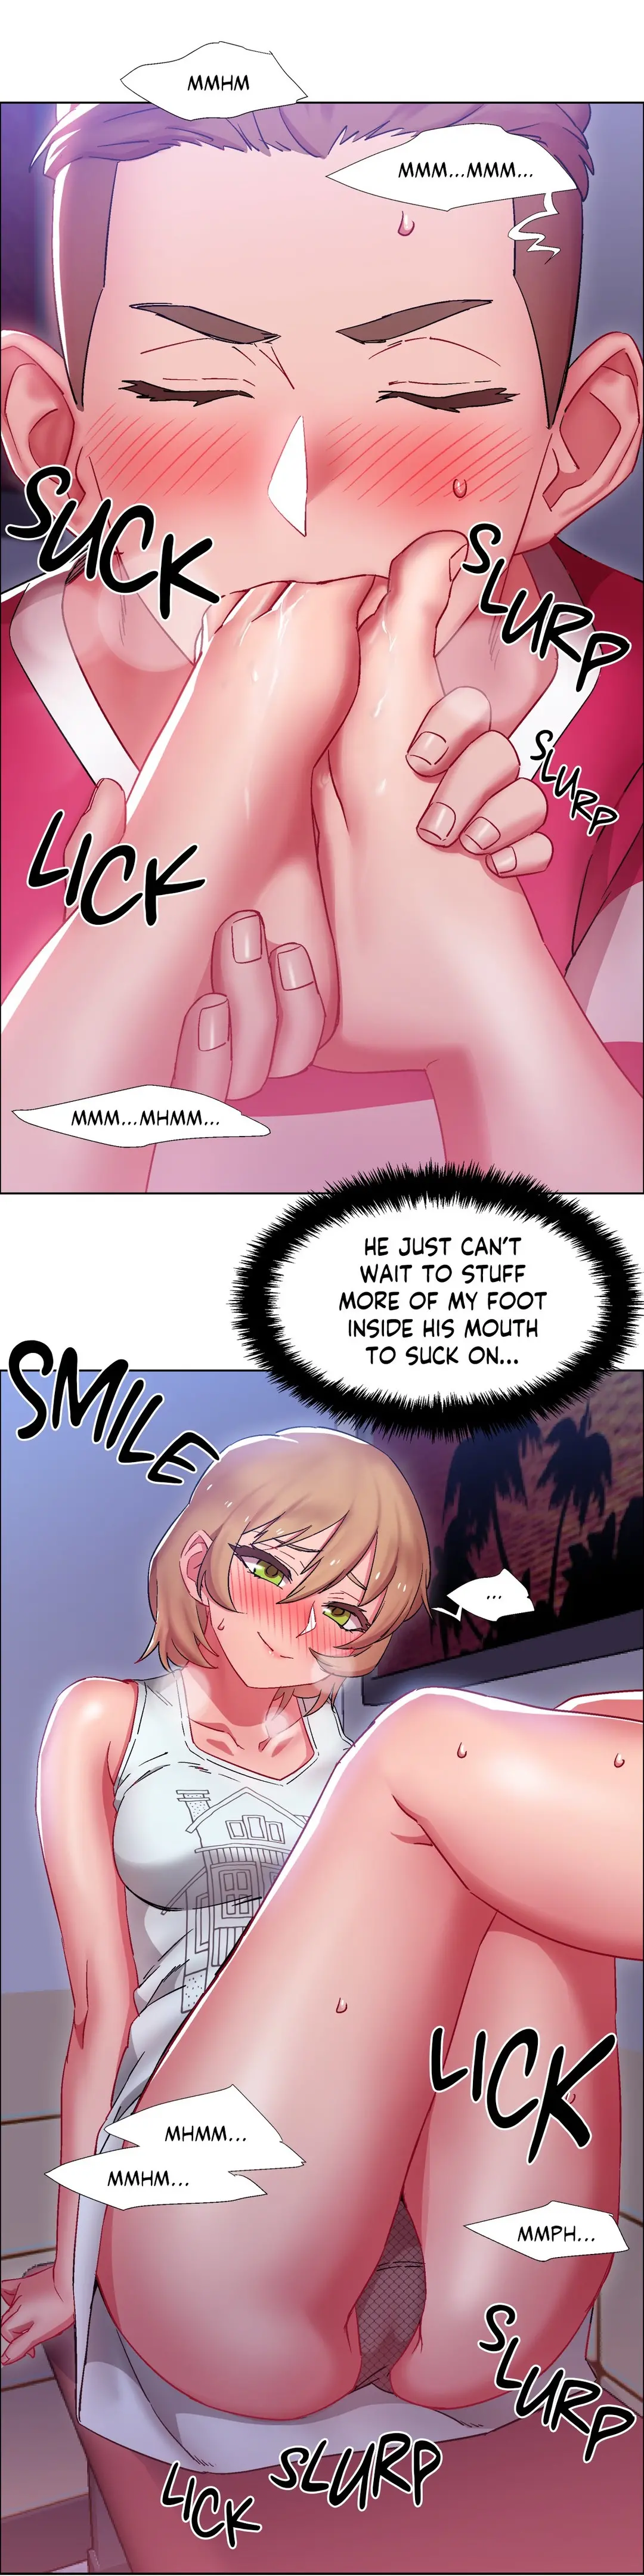 Rental Girls - Chapter 20 Page 9